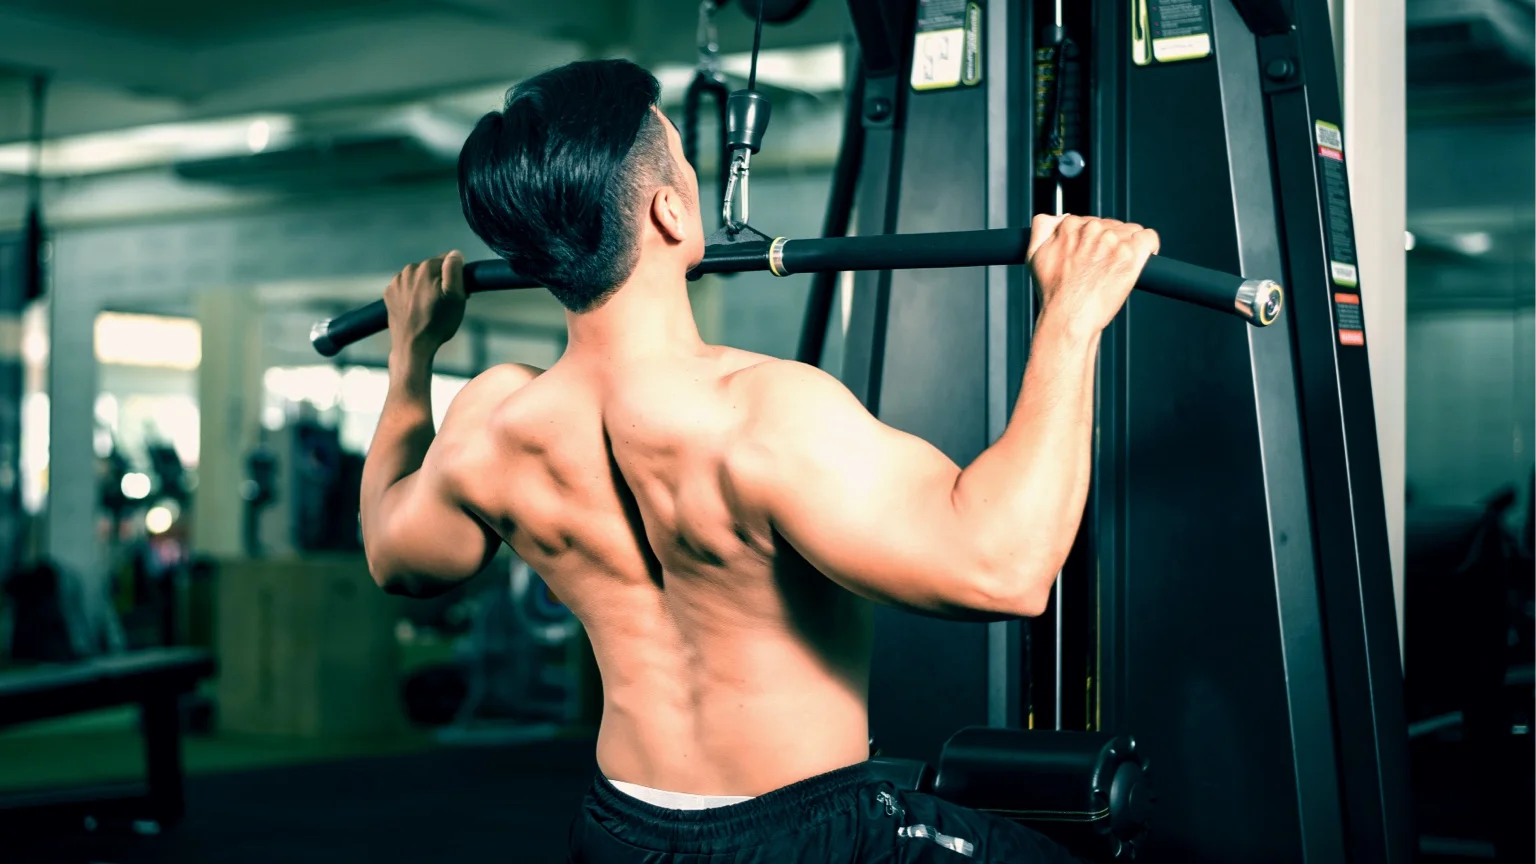 Man performs a lat pulldown, one of the exercises in the back day workout routine